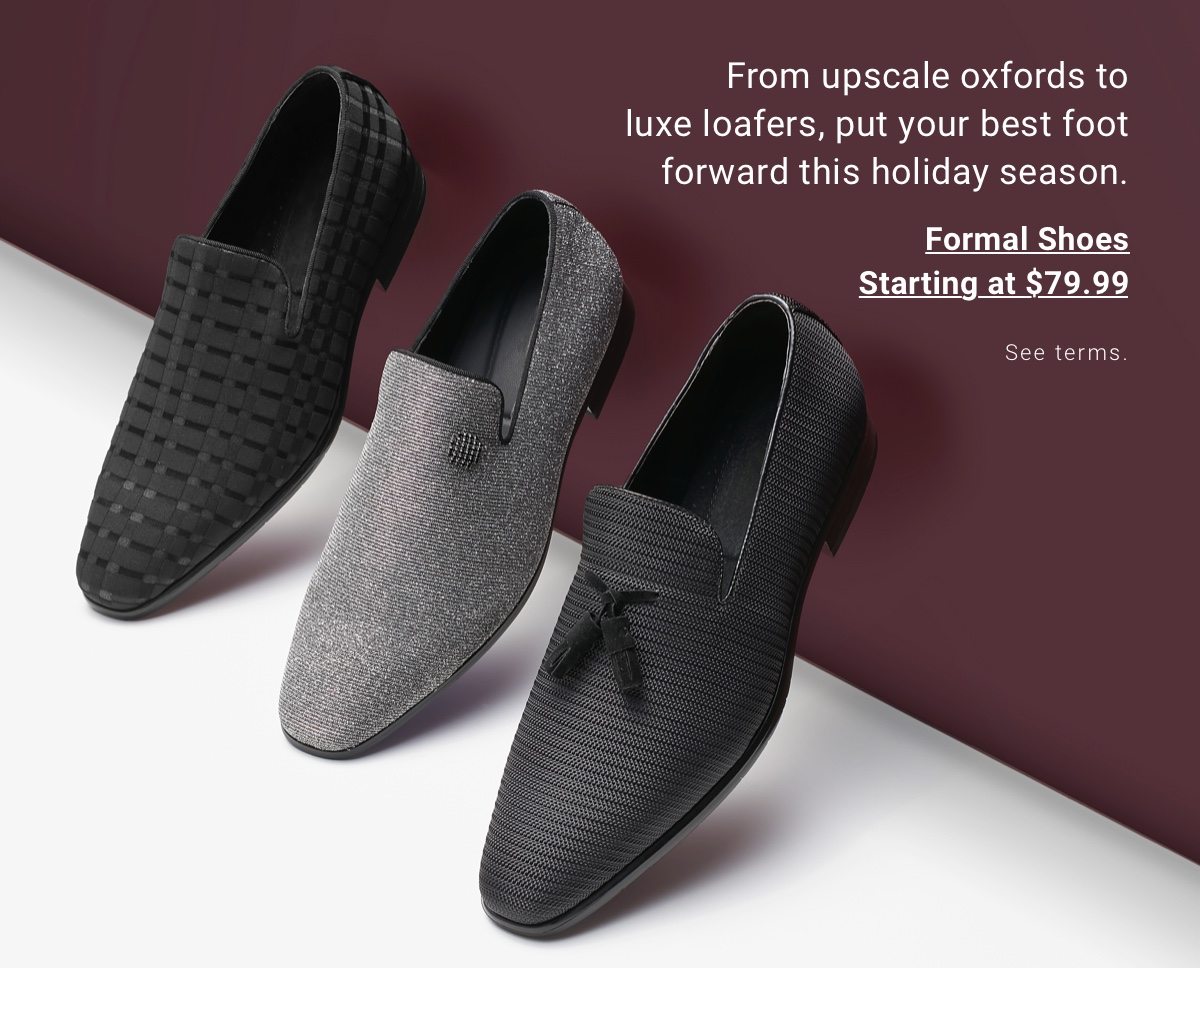 Formal Shoes Starting at $79.99